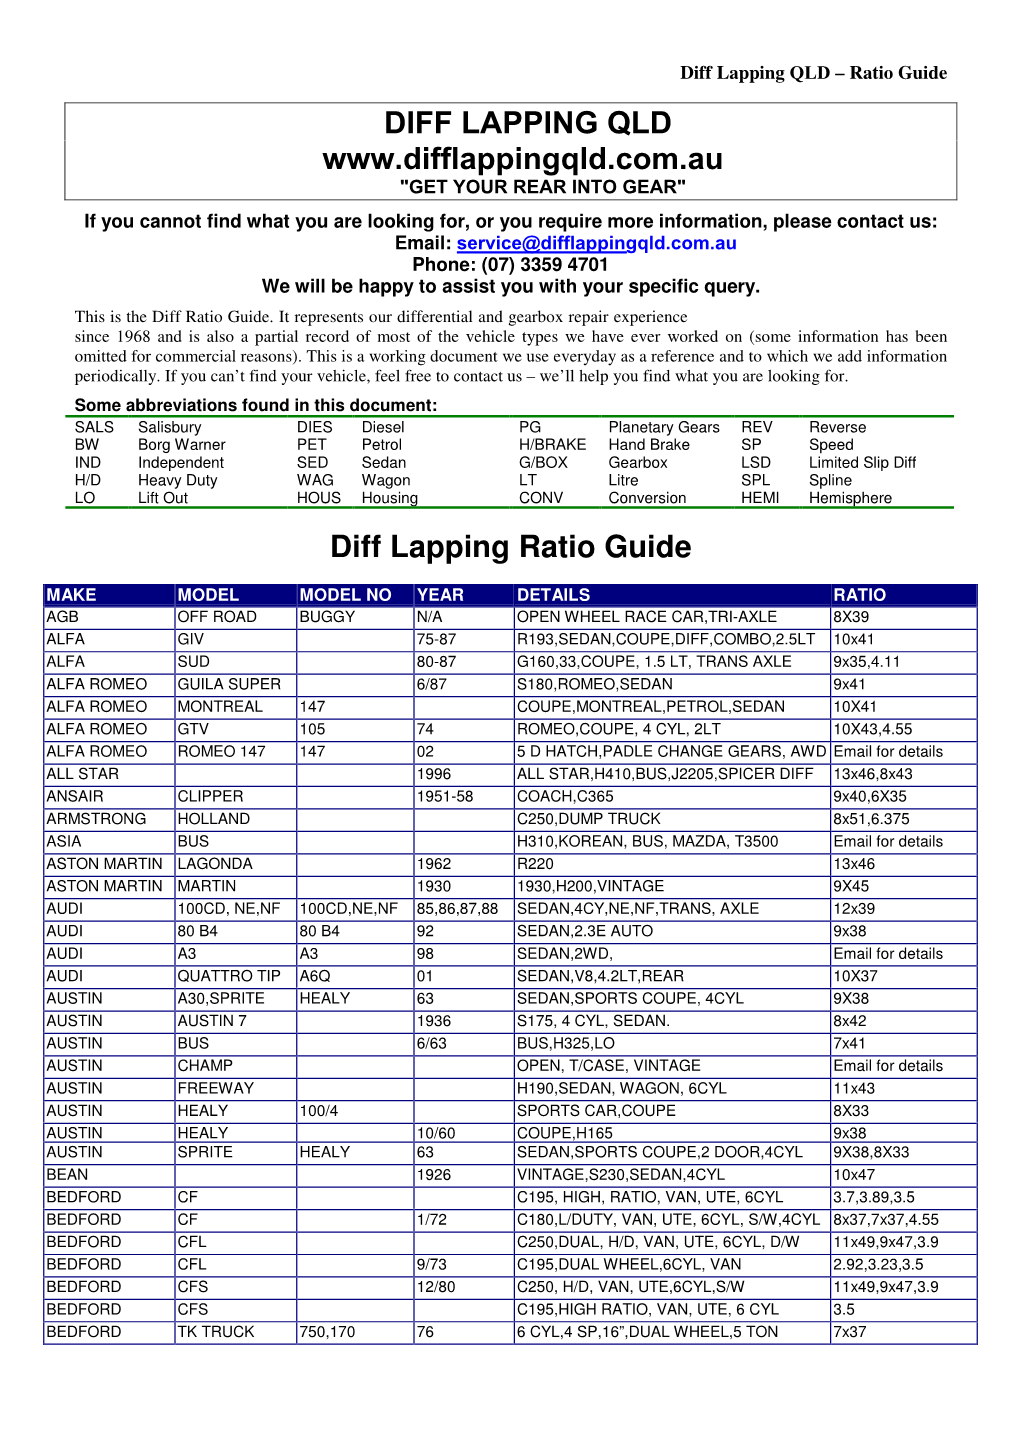 Download Our Diff Lapping Ratio Guide